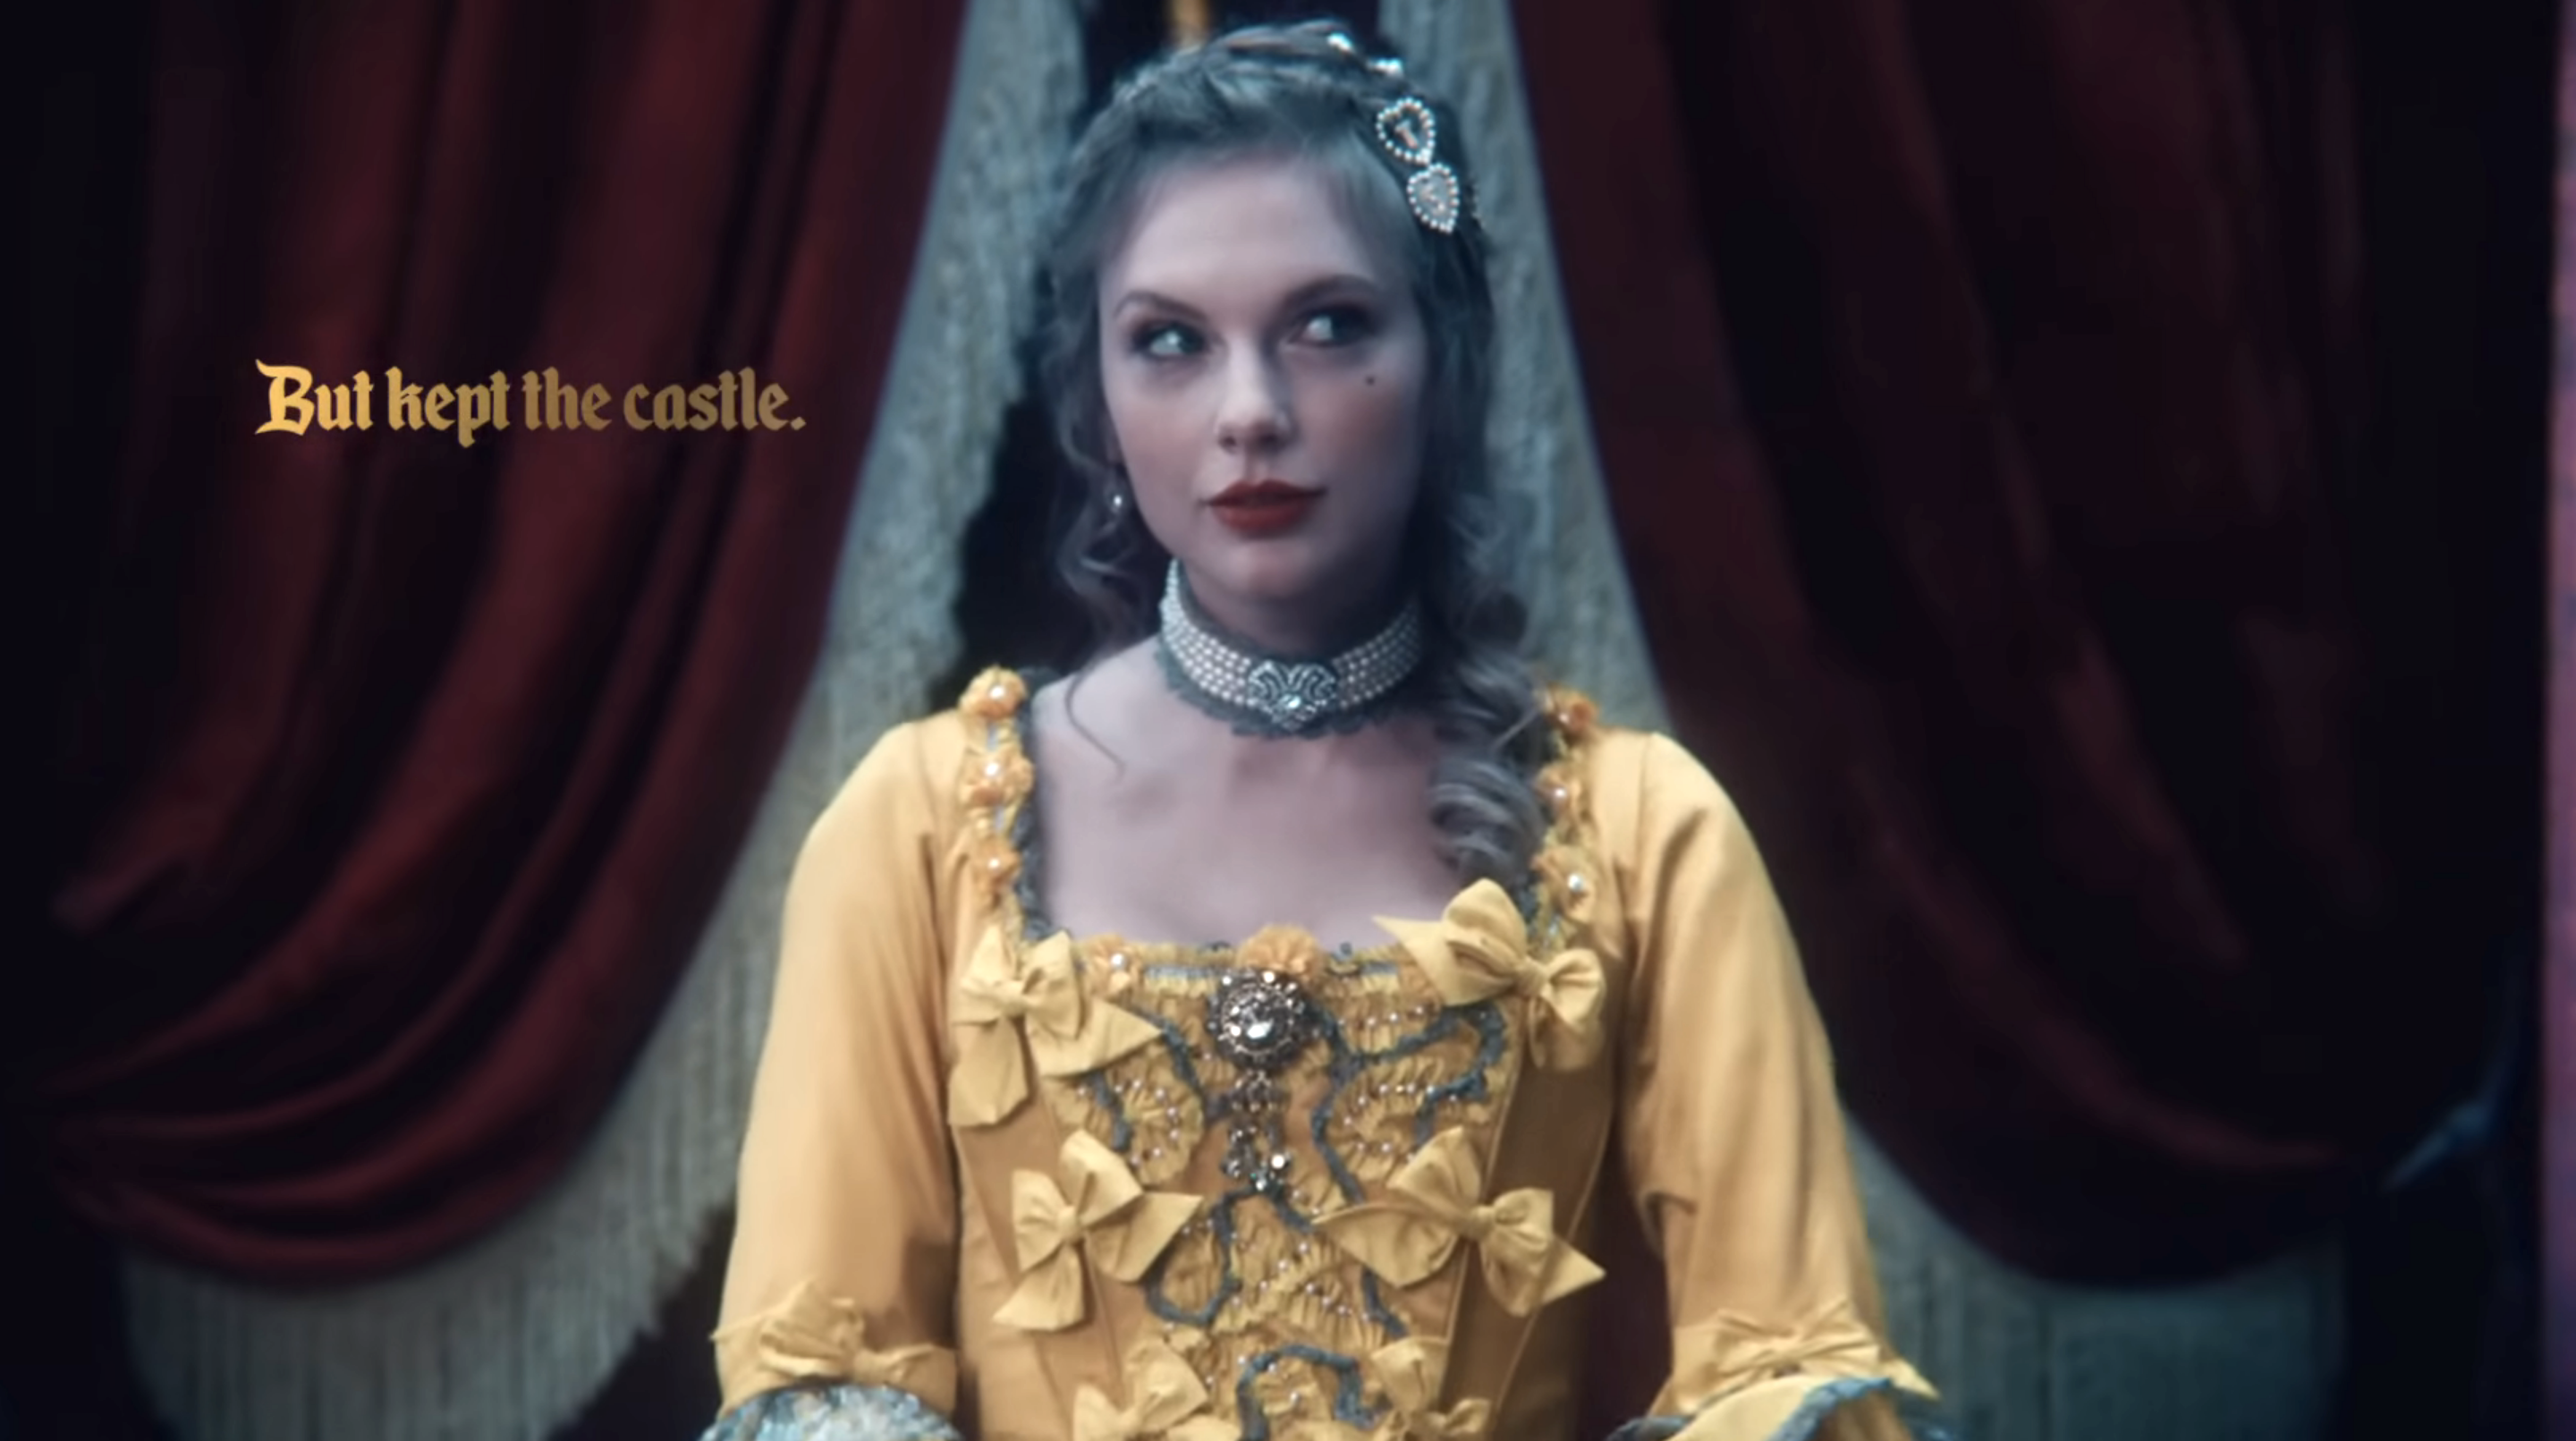 Taylor wearing a corseted dress with the caption &quot;But kept the castle&quot; next to her